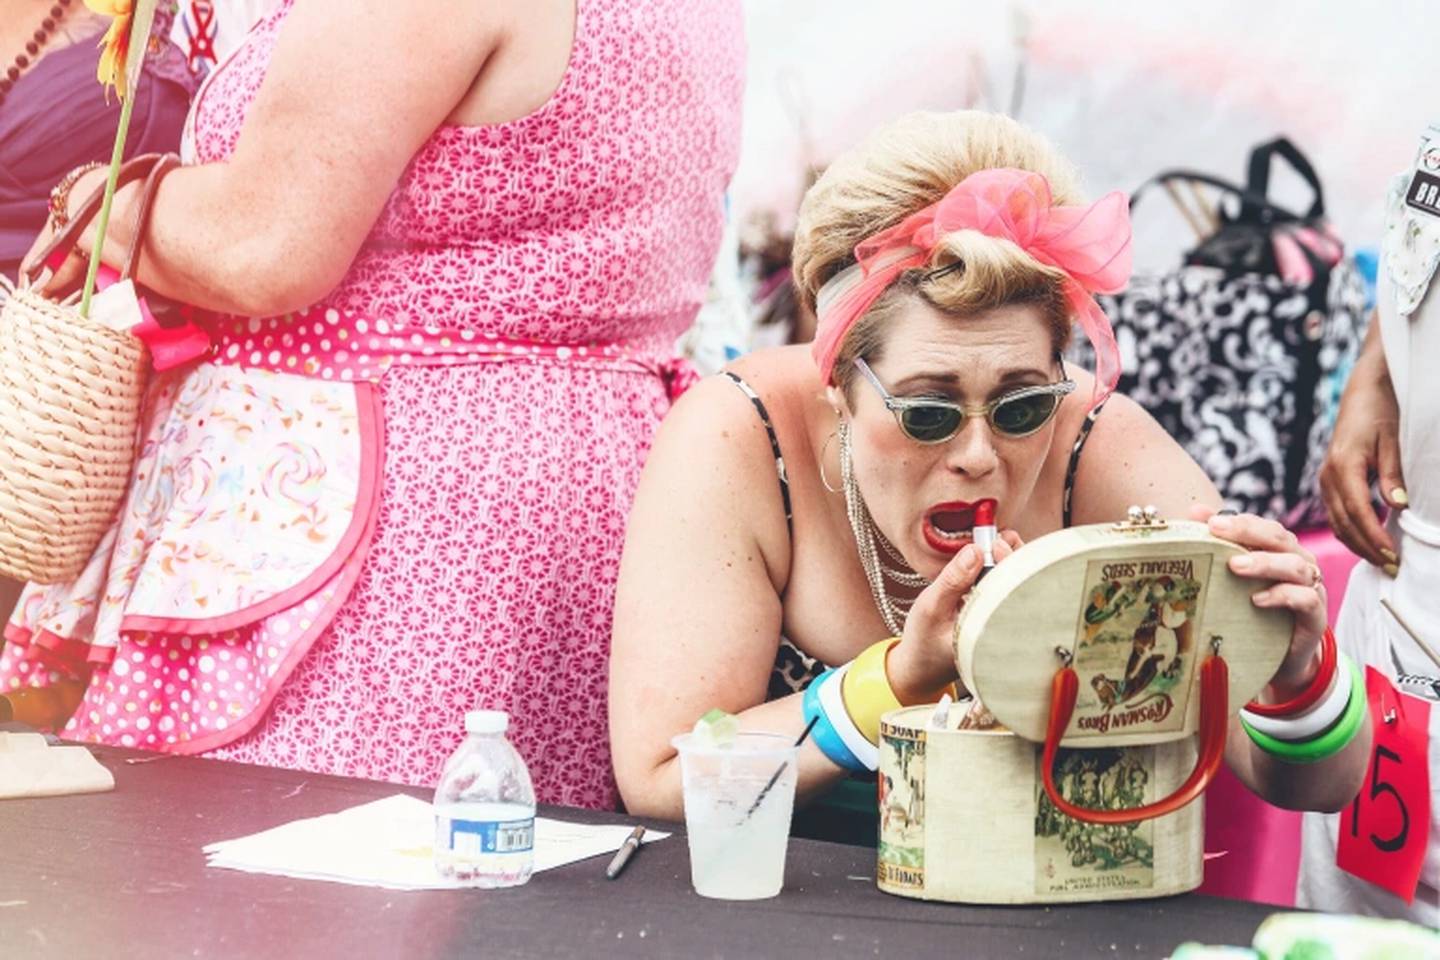 A woman puts on lipstick to complete her look as a Baltimore "hon" at HONFest in 2018.